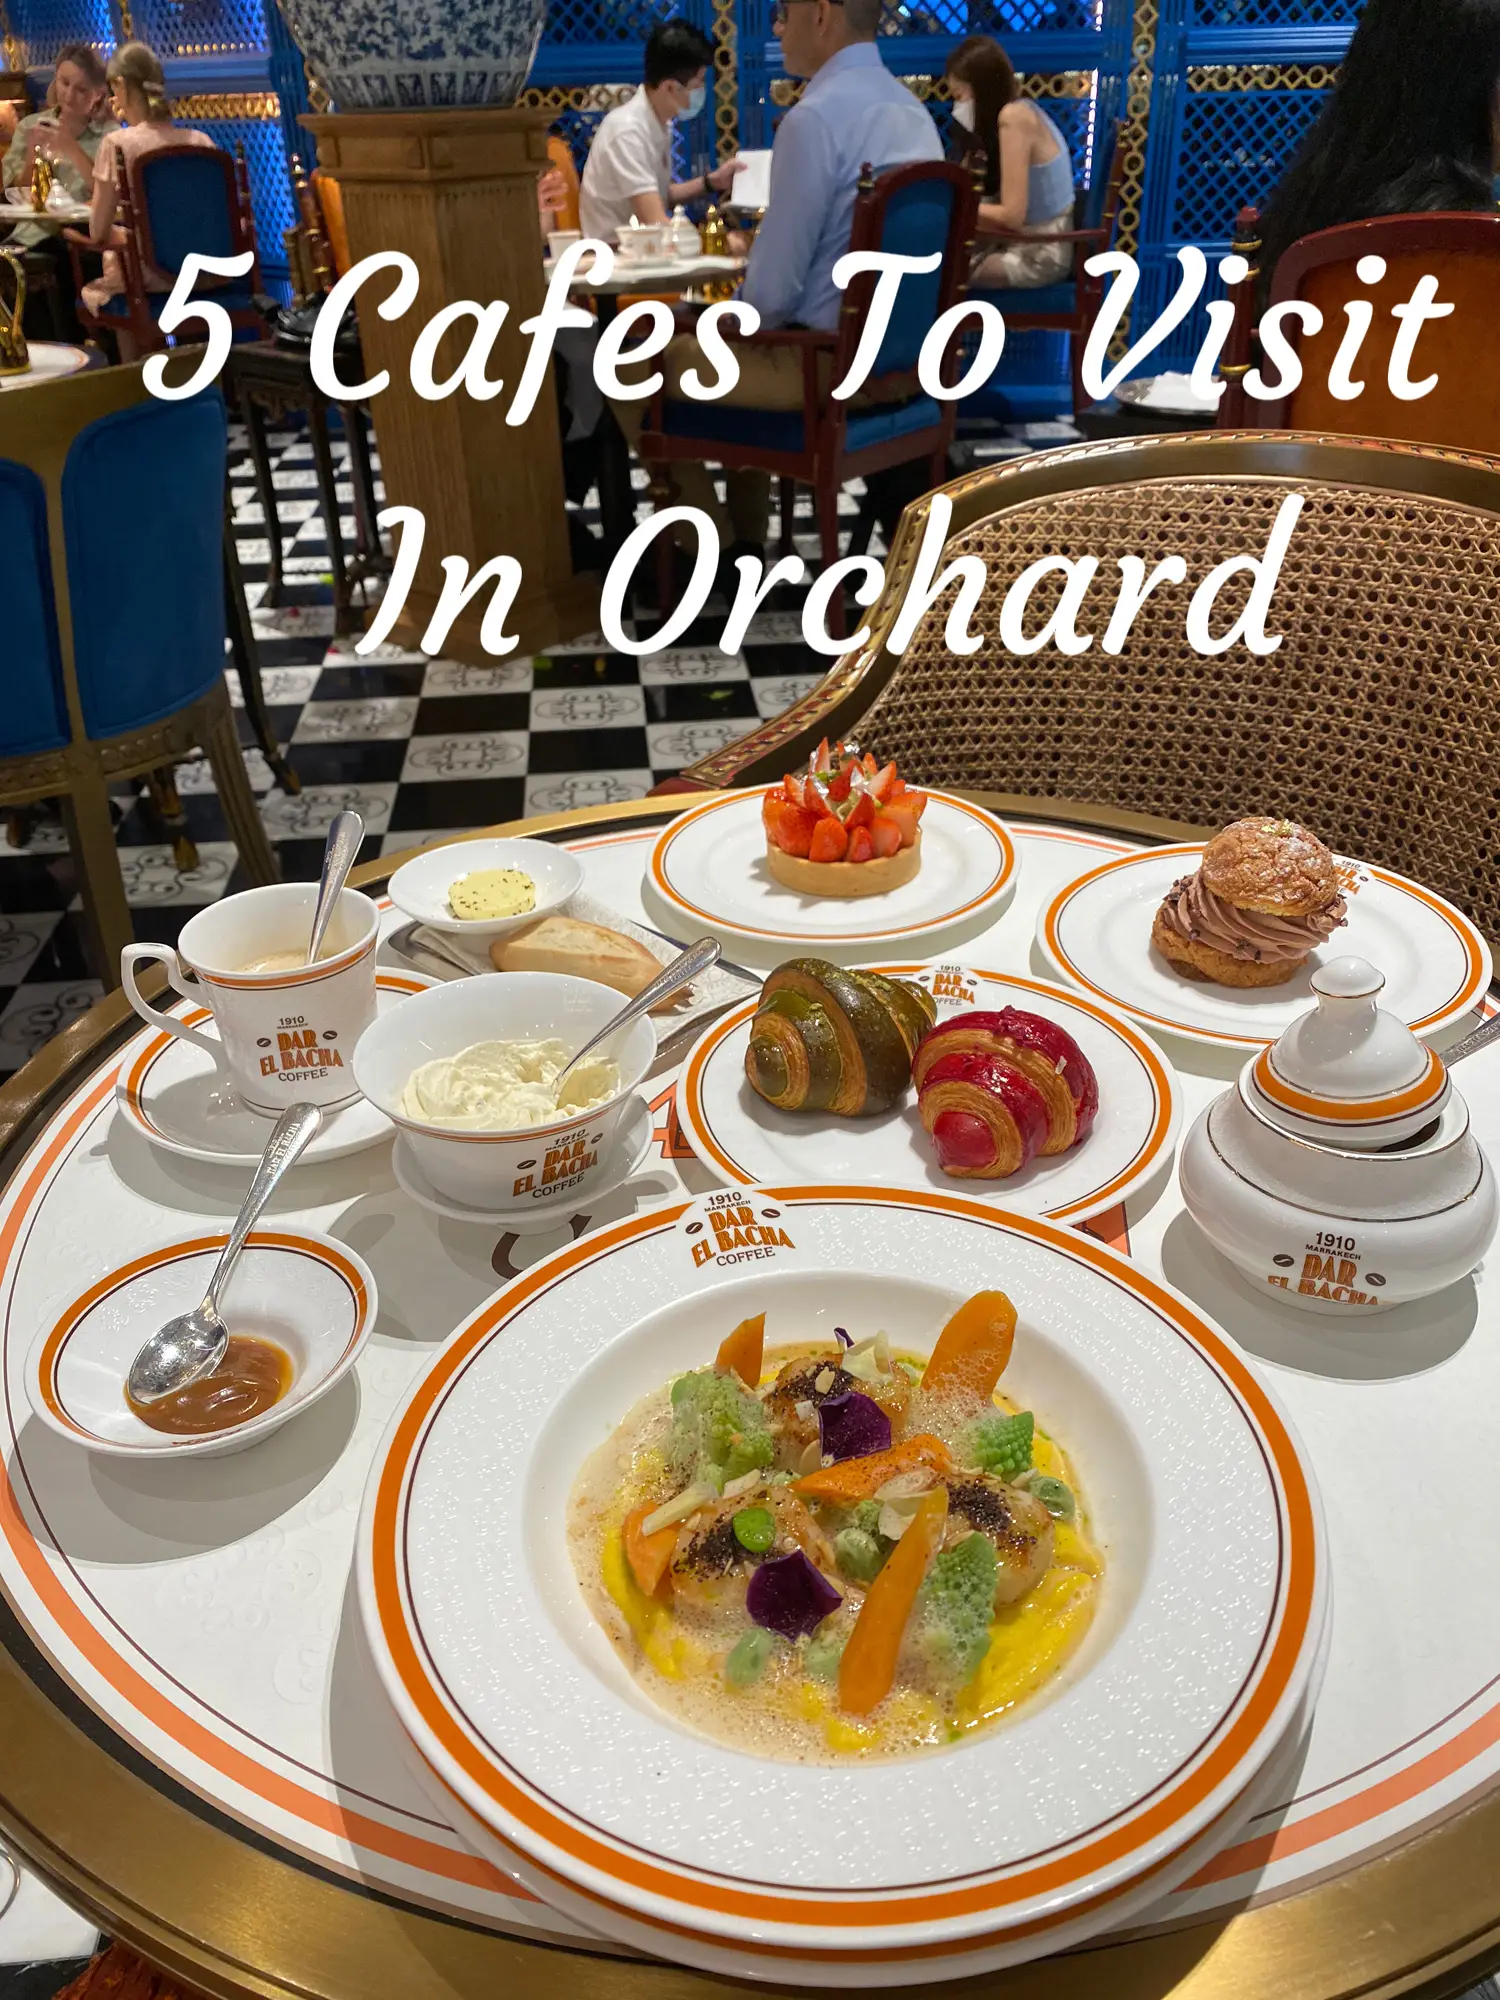 Cafe Guide: 5 cafes to visit in Orchard🇸🇬's images